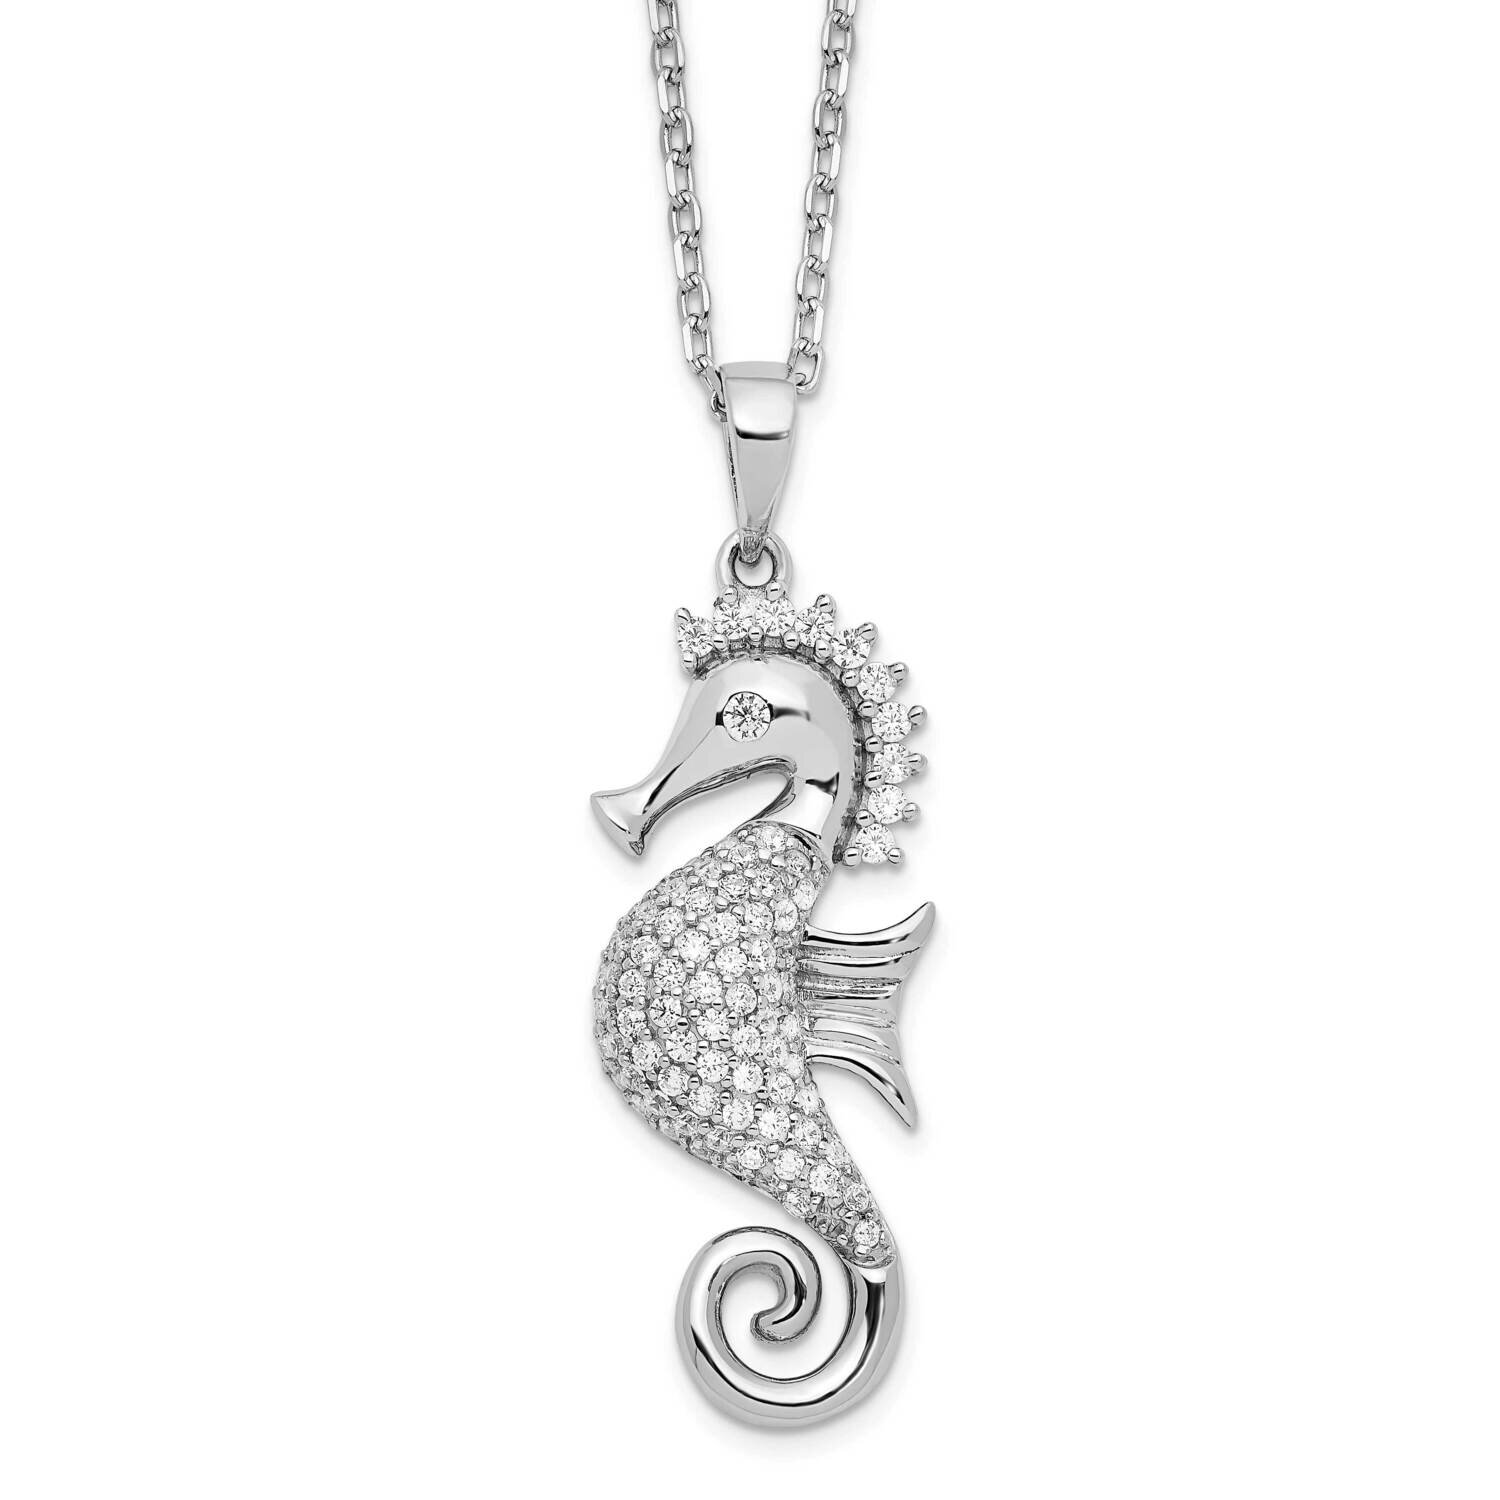 Cheryl M Rhodium-Plated CZ Diamond with 2 Inch Ext. Seahorse Necklace Sterling Silver QCM1546-16